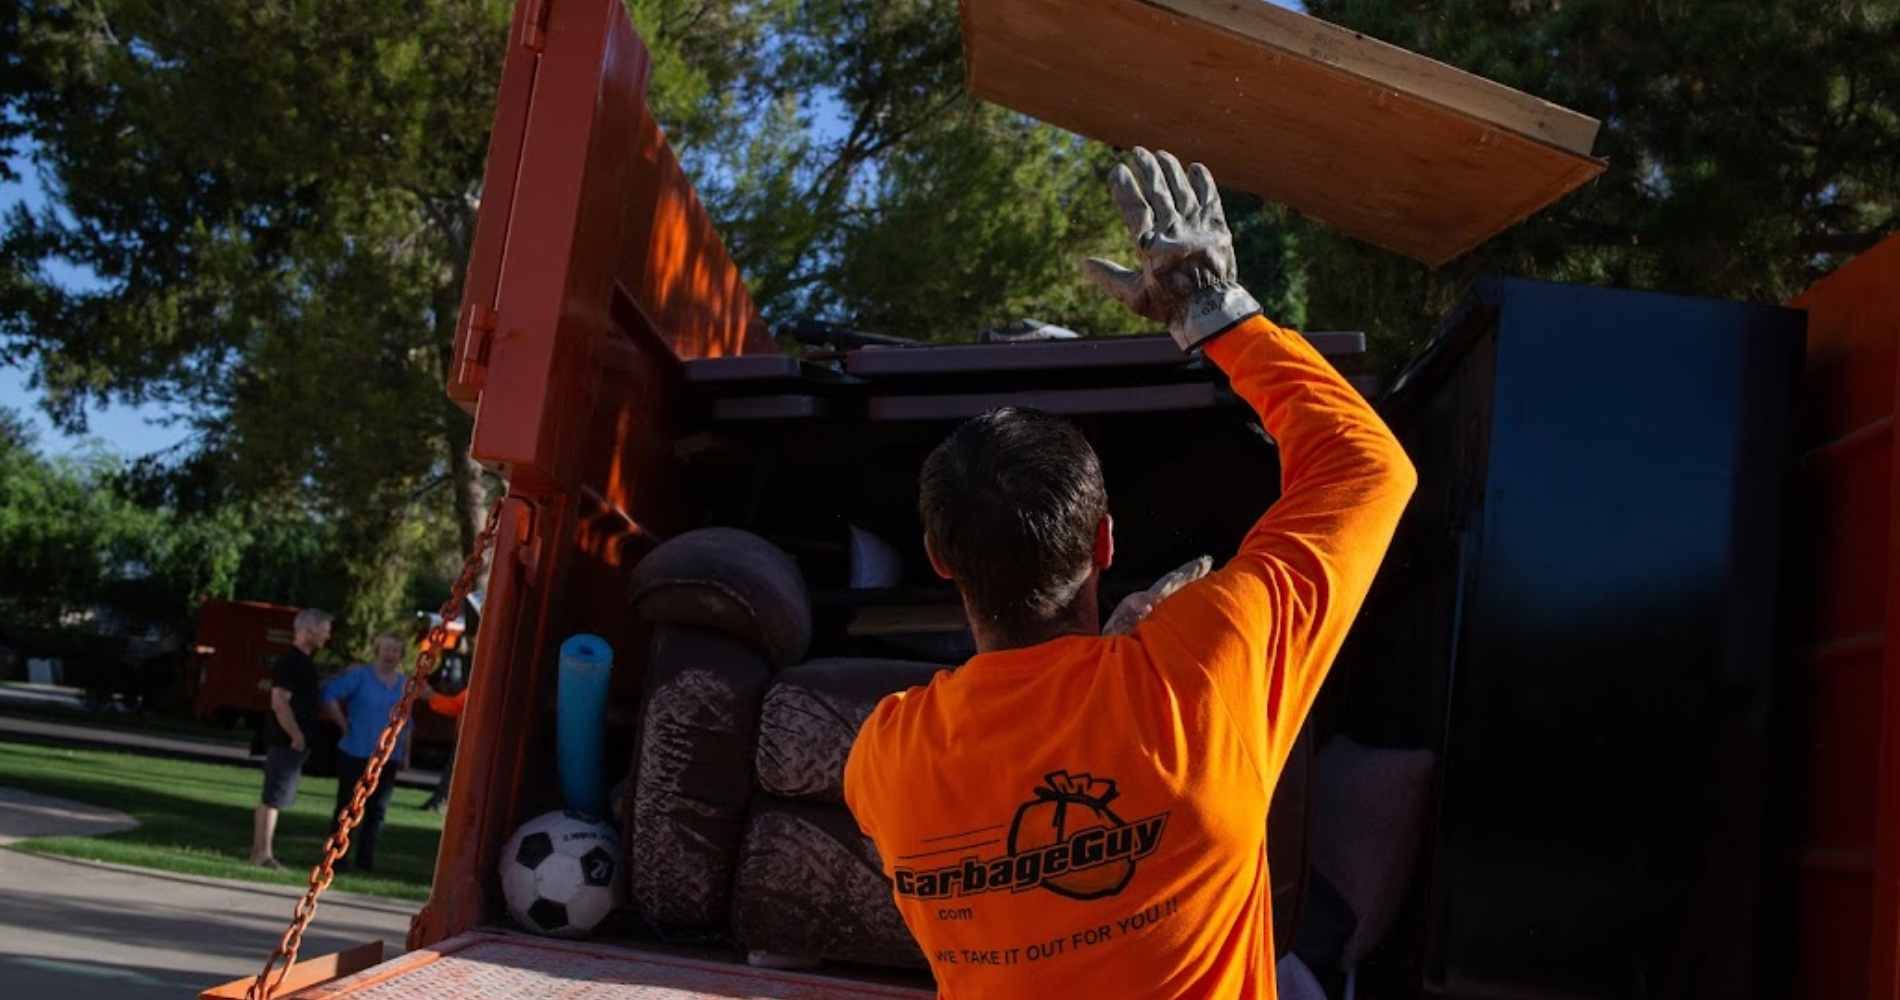 #1 for Eviction Cleanout in Gilbert, AZ with Over 1200 5-Star Reviews!